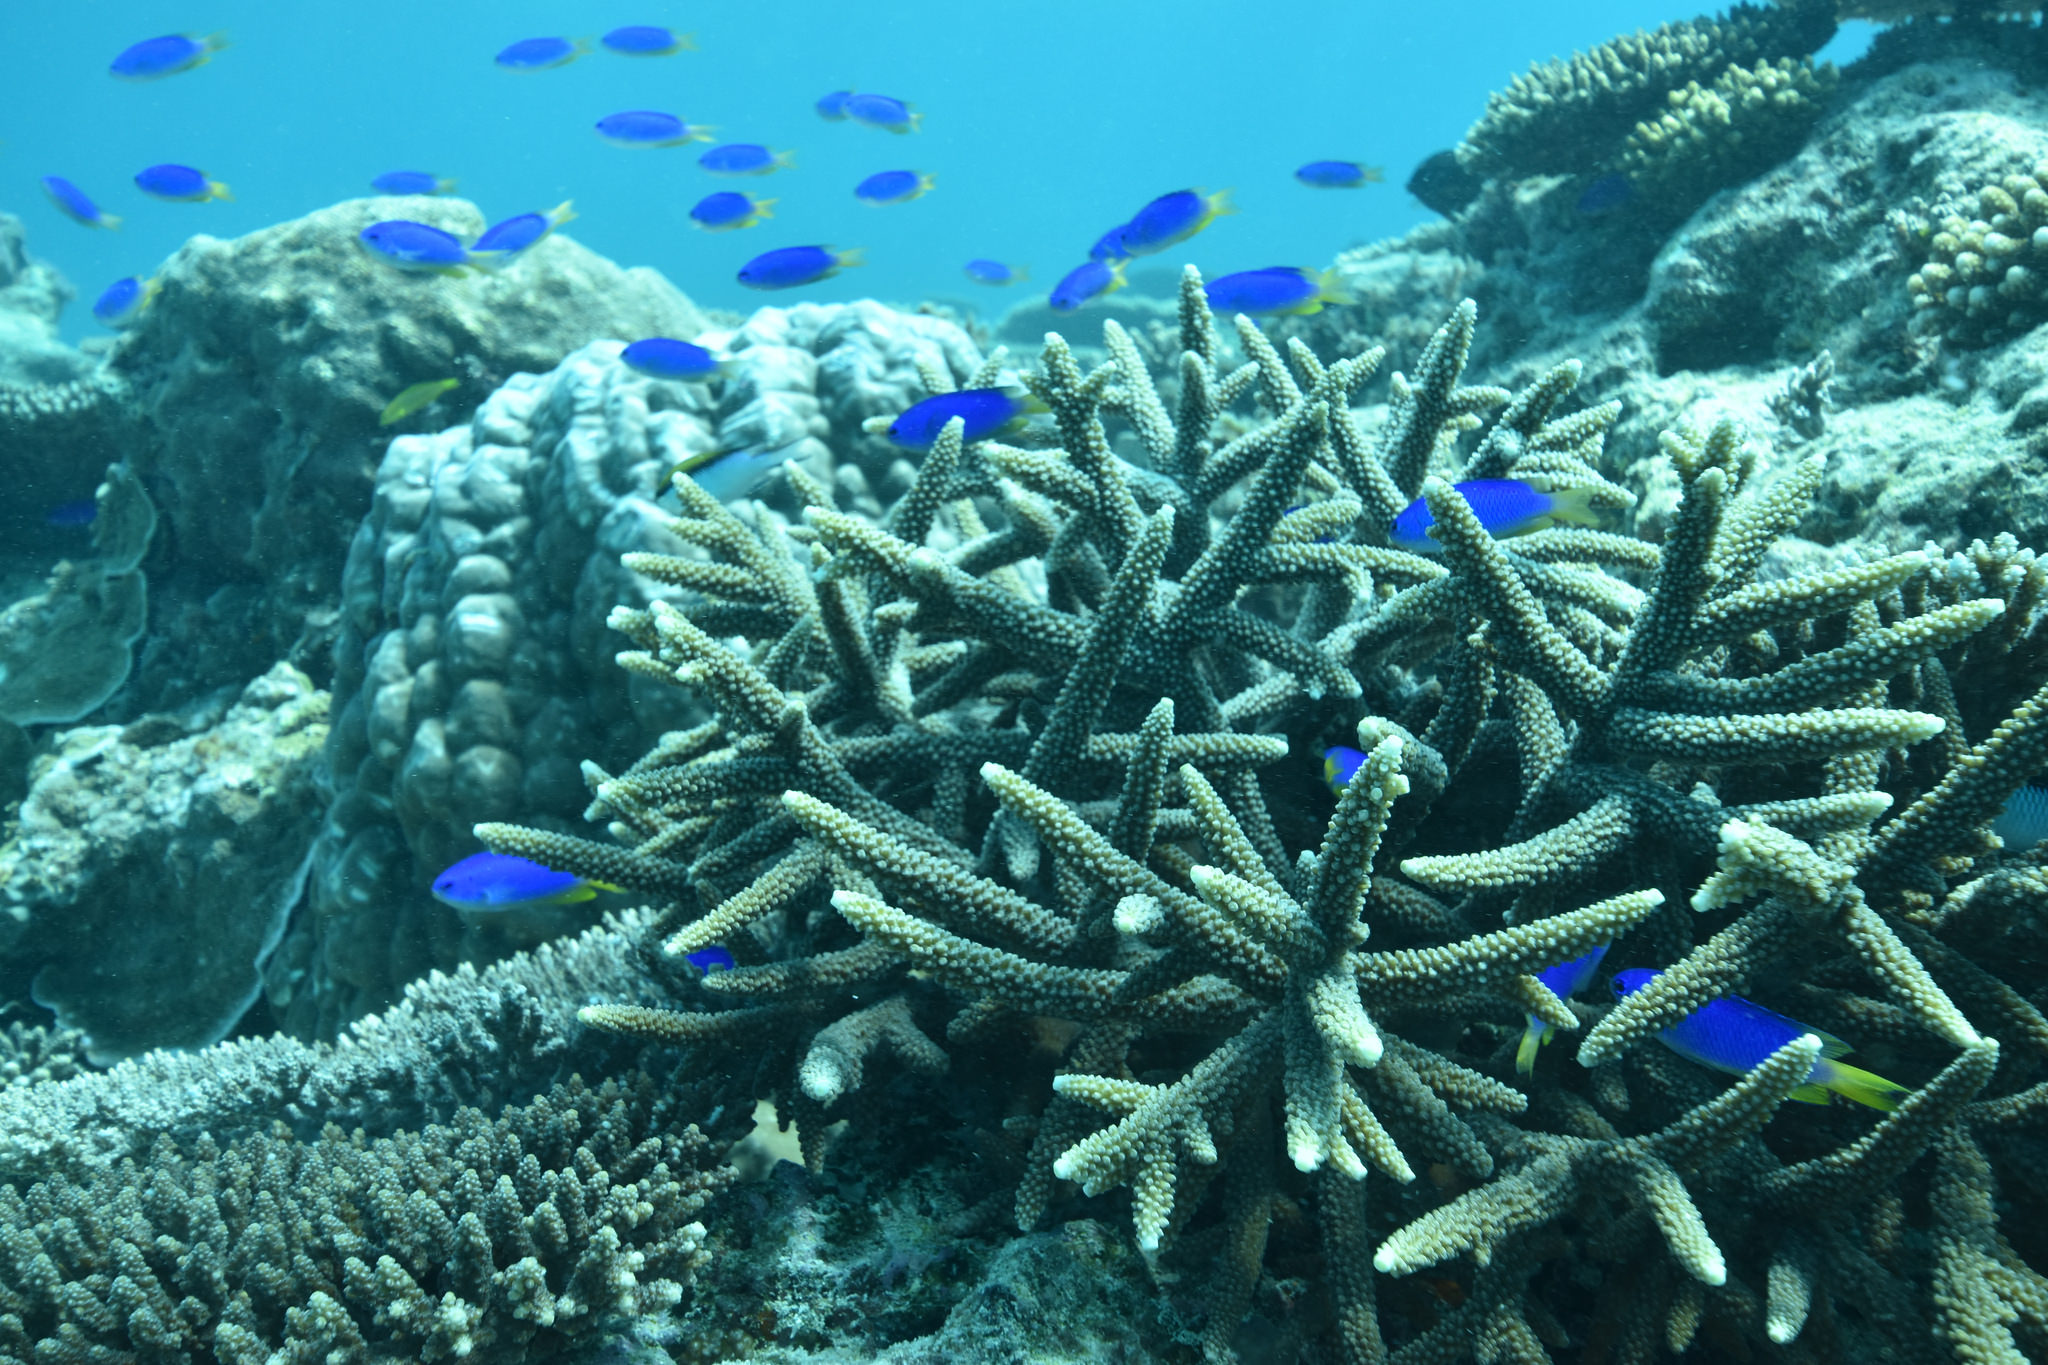 Blue fish and coral near the reef